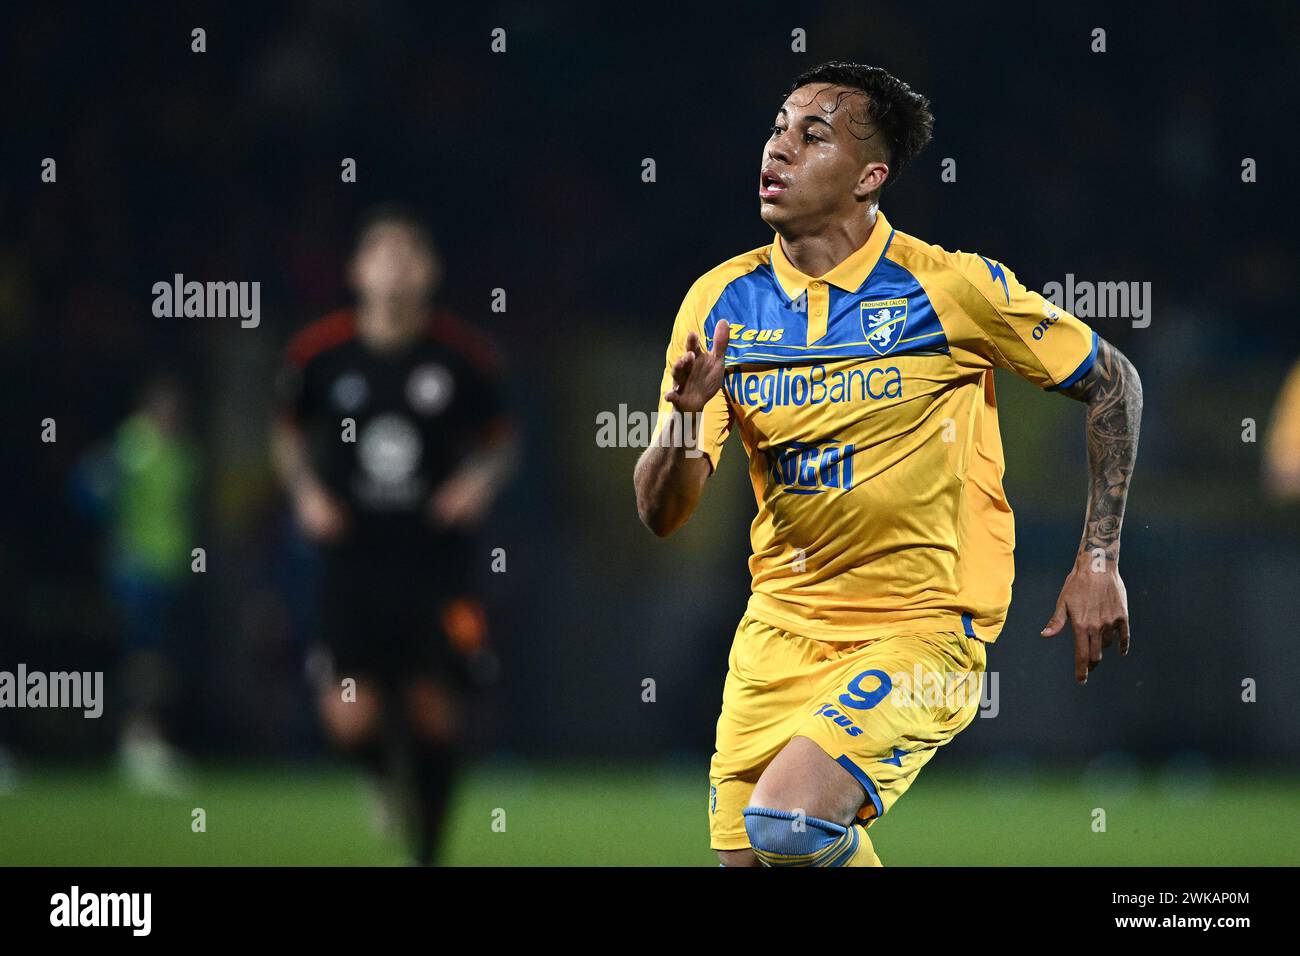 Kaio Jorge of Frosinone Calcio in action during the Serie A match between Frosinone Calcio and AS Roma at Stadio Benito Stirpe Frosinone Italy on 18 F Stock Photo